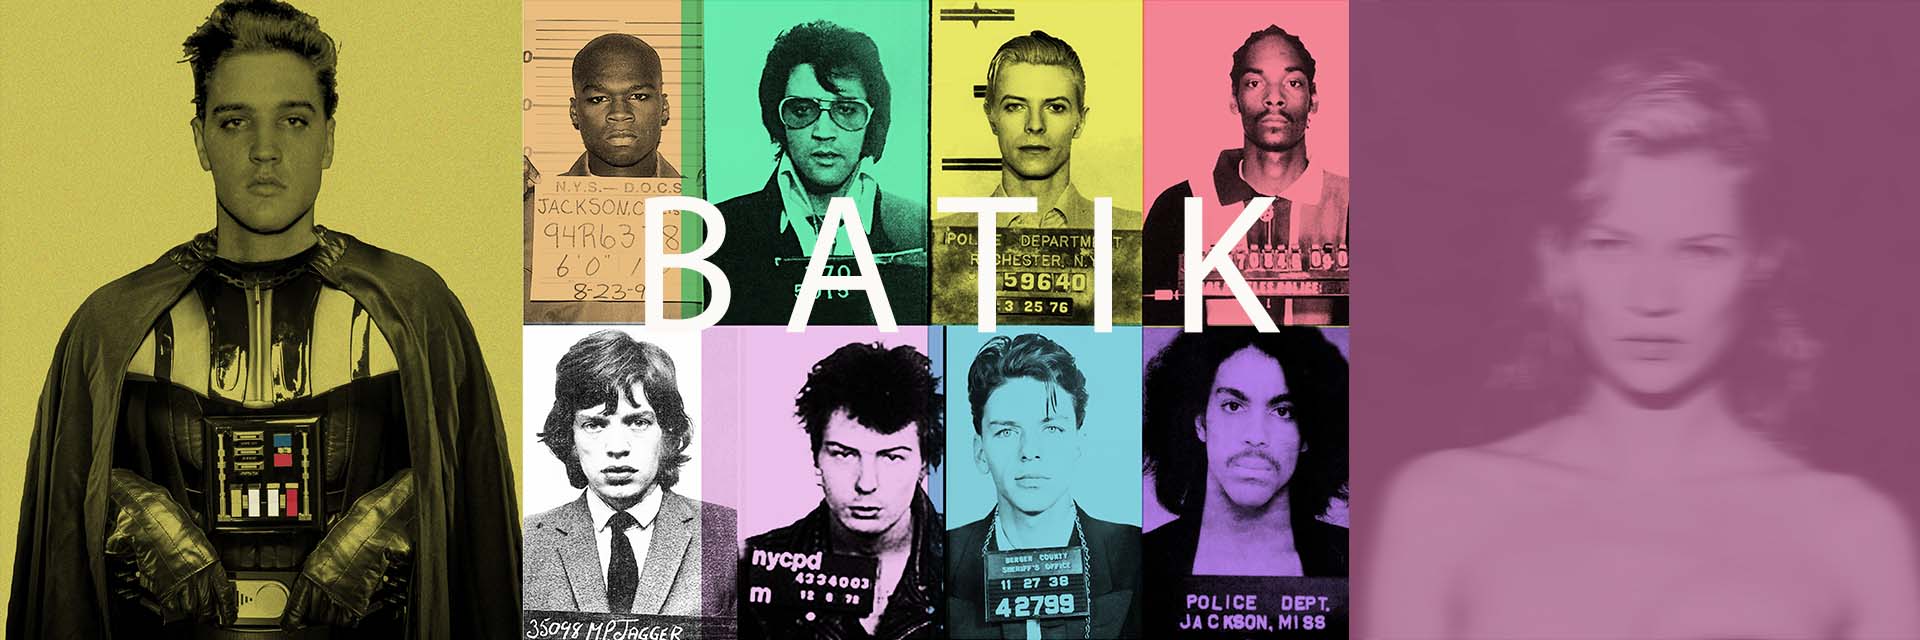 Elvis Presley as Darth Vader, mugshots of 50 Cent, Elvis, David Bowie, Snoop Dogg, Mick Jagger, Sid Vicious, Frank Sinatra, Prince, artwork of Kate Moss all by the artist known as Batik.